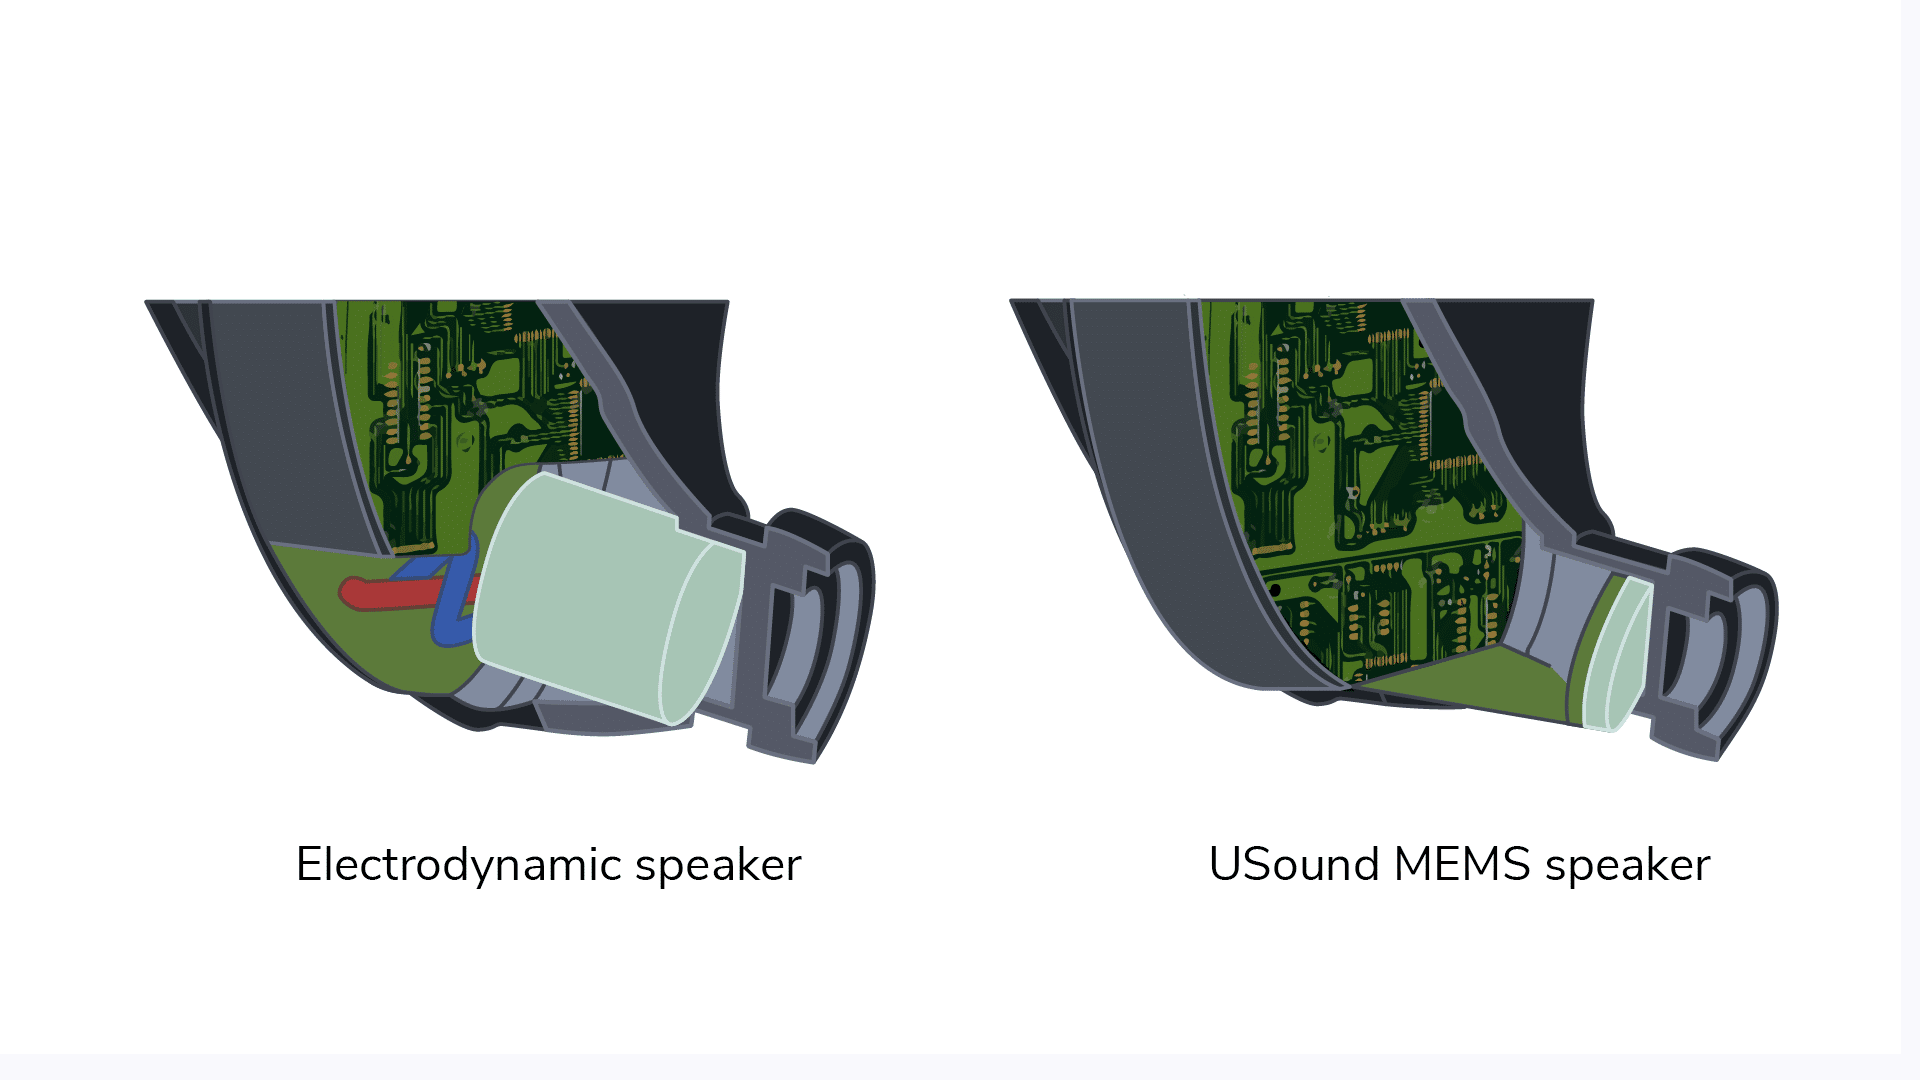 Comparison between VS voice coil speakers and USound MEMS speakers